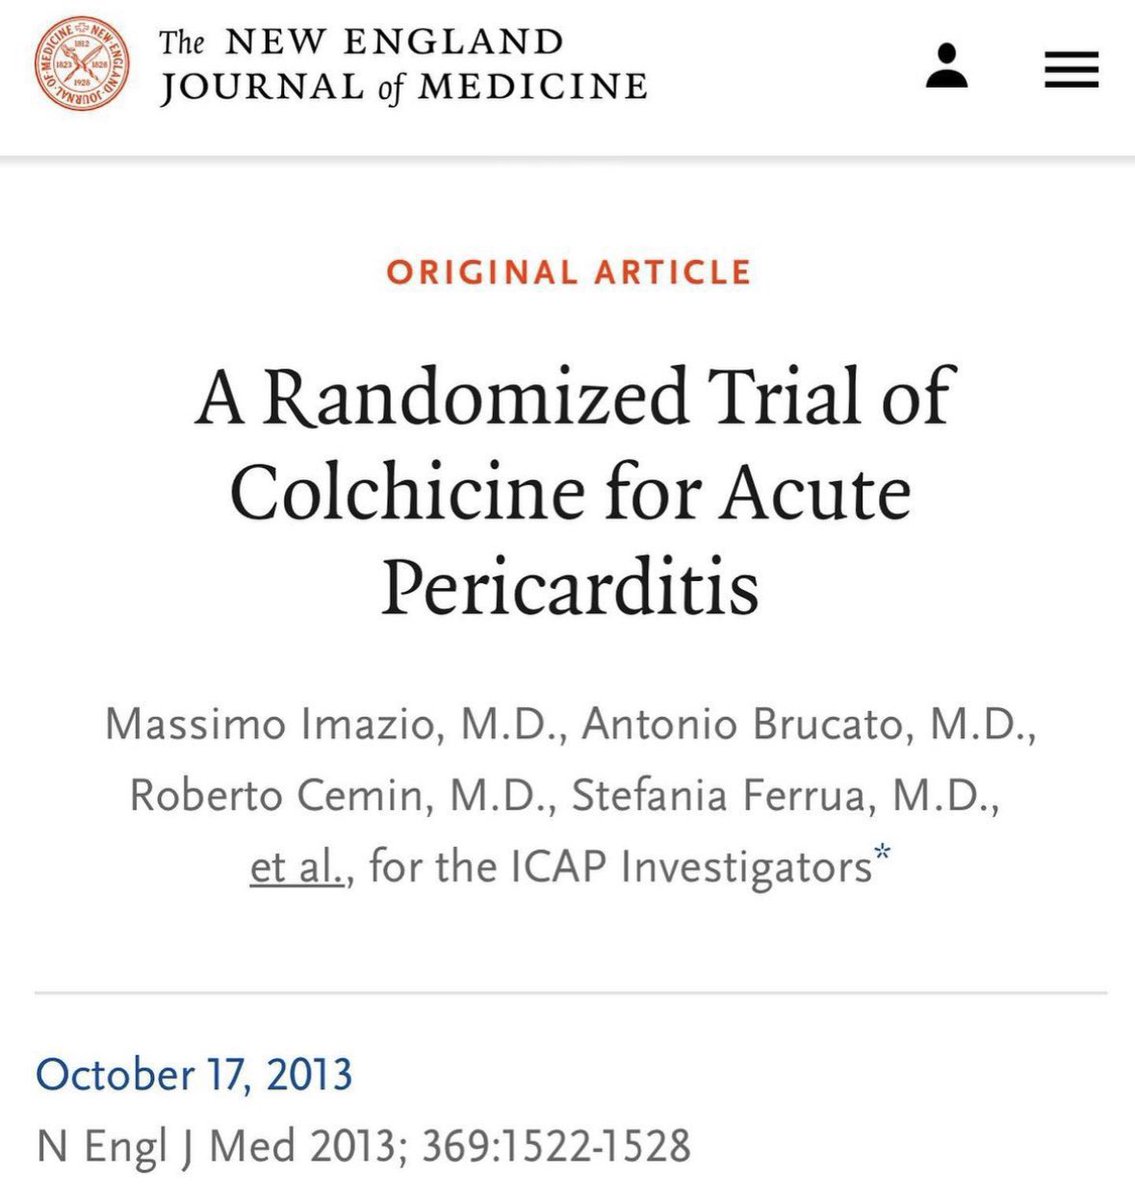 Colchicine for pericarditis? 3 months of colchicine with 1-2 weeks of high dose NSAID is now standard of care for acute pericarditis, established by this landmark trial. ICAP Trial, NEJM 2013 ♥️